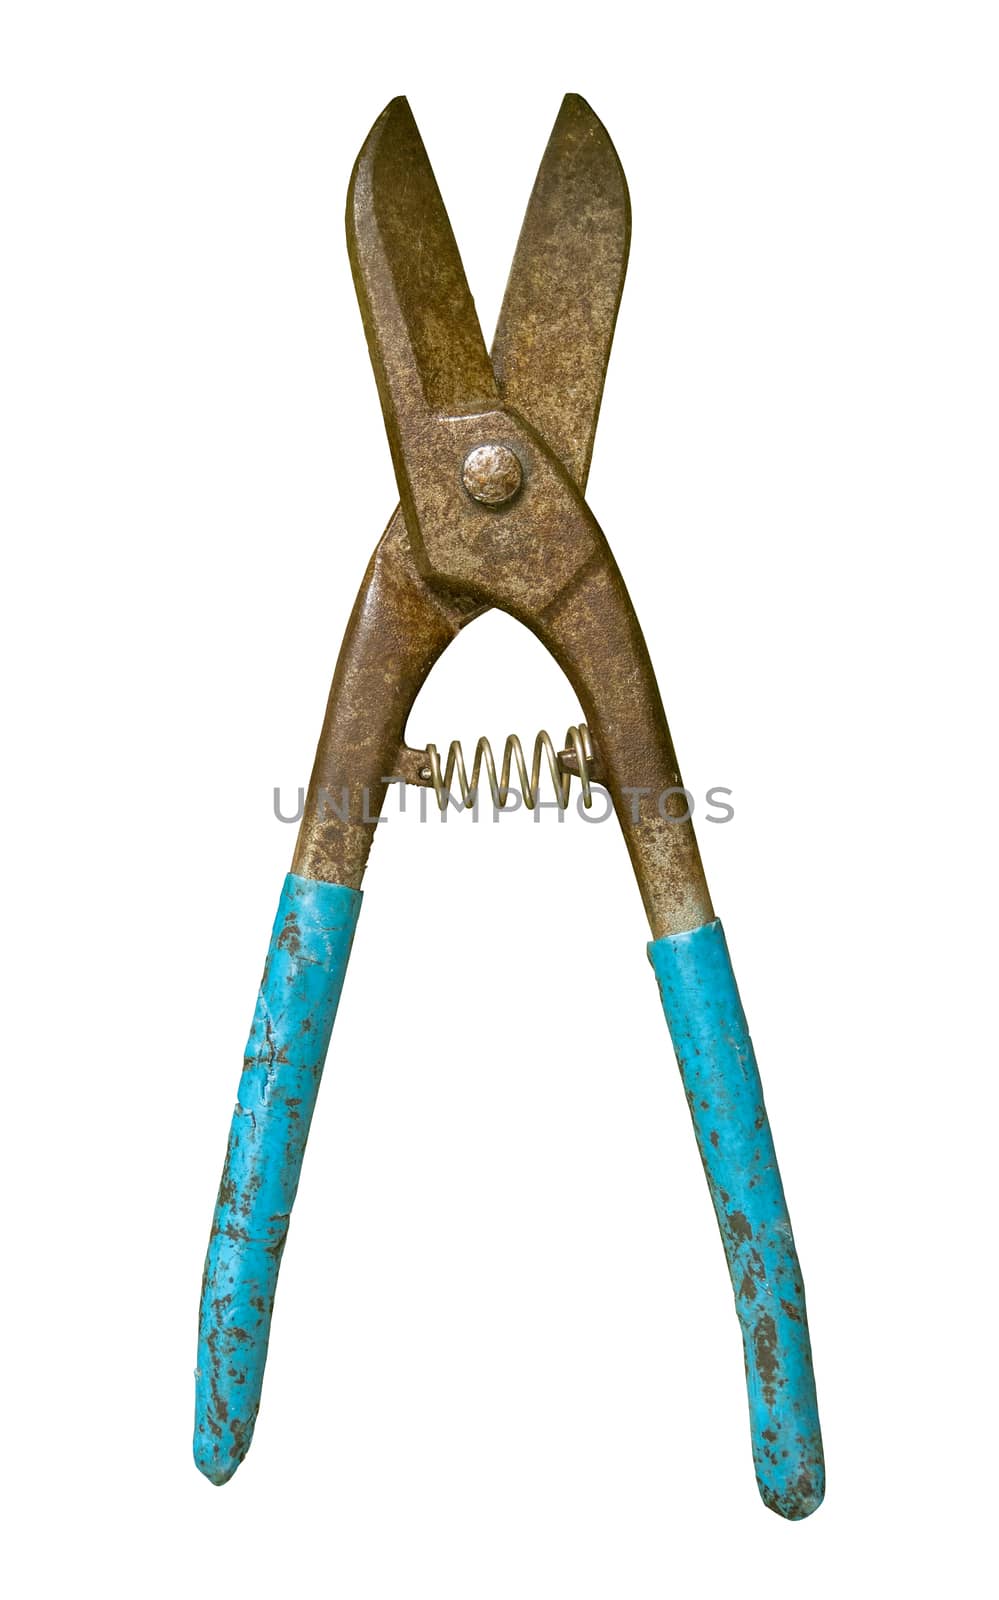 Isolated Grungy Old Wire Or Bolt Cutters On A White Background